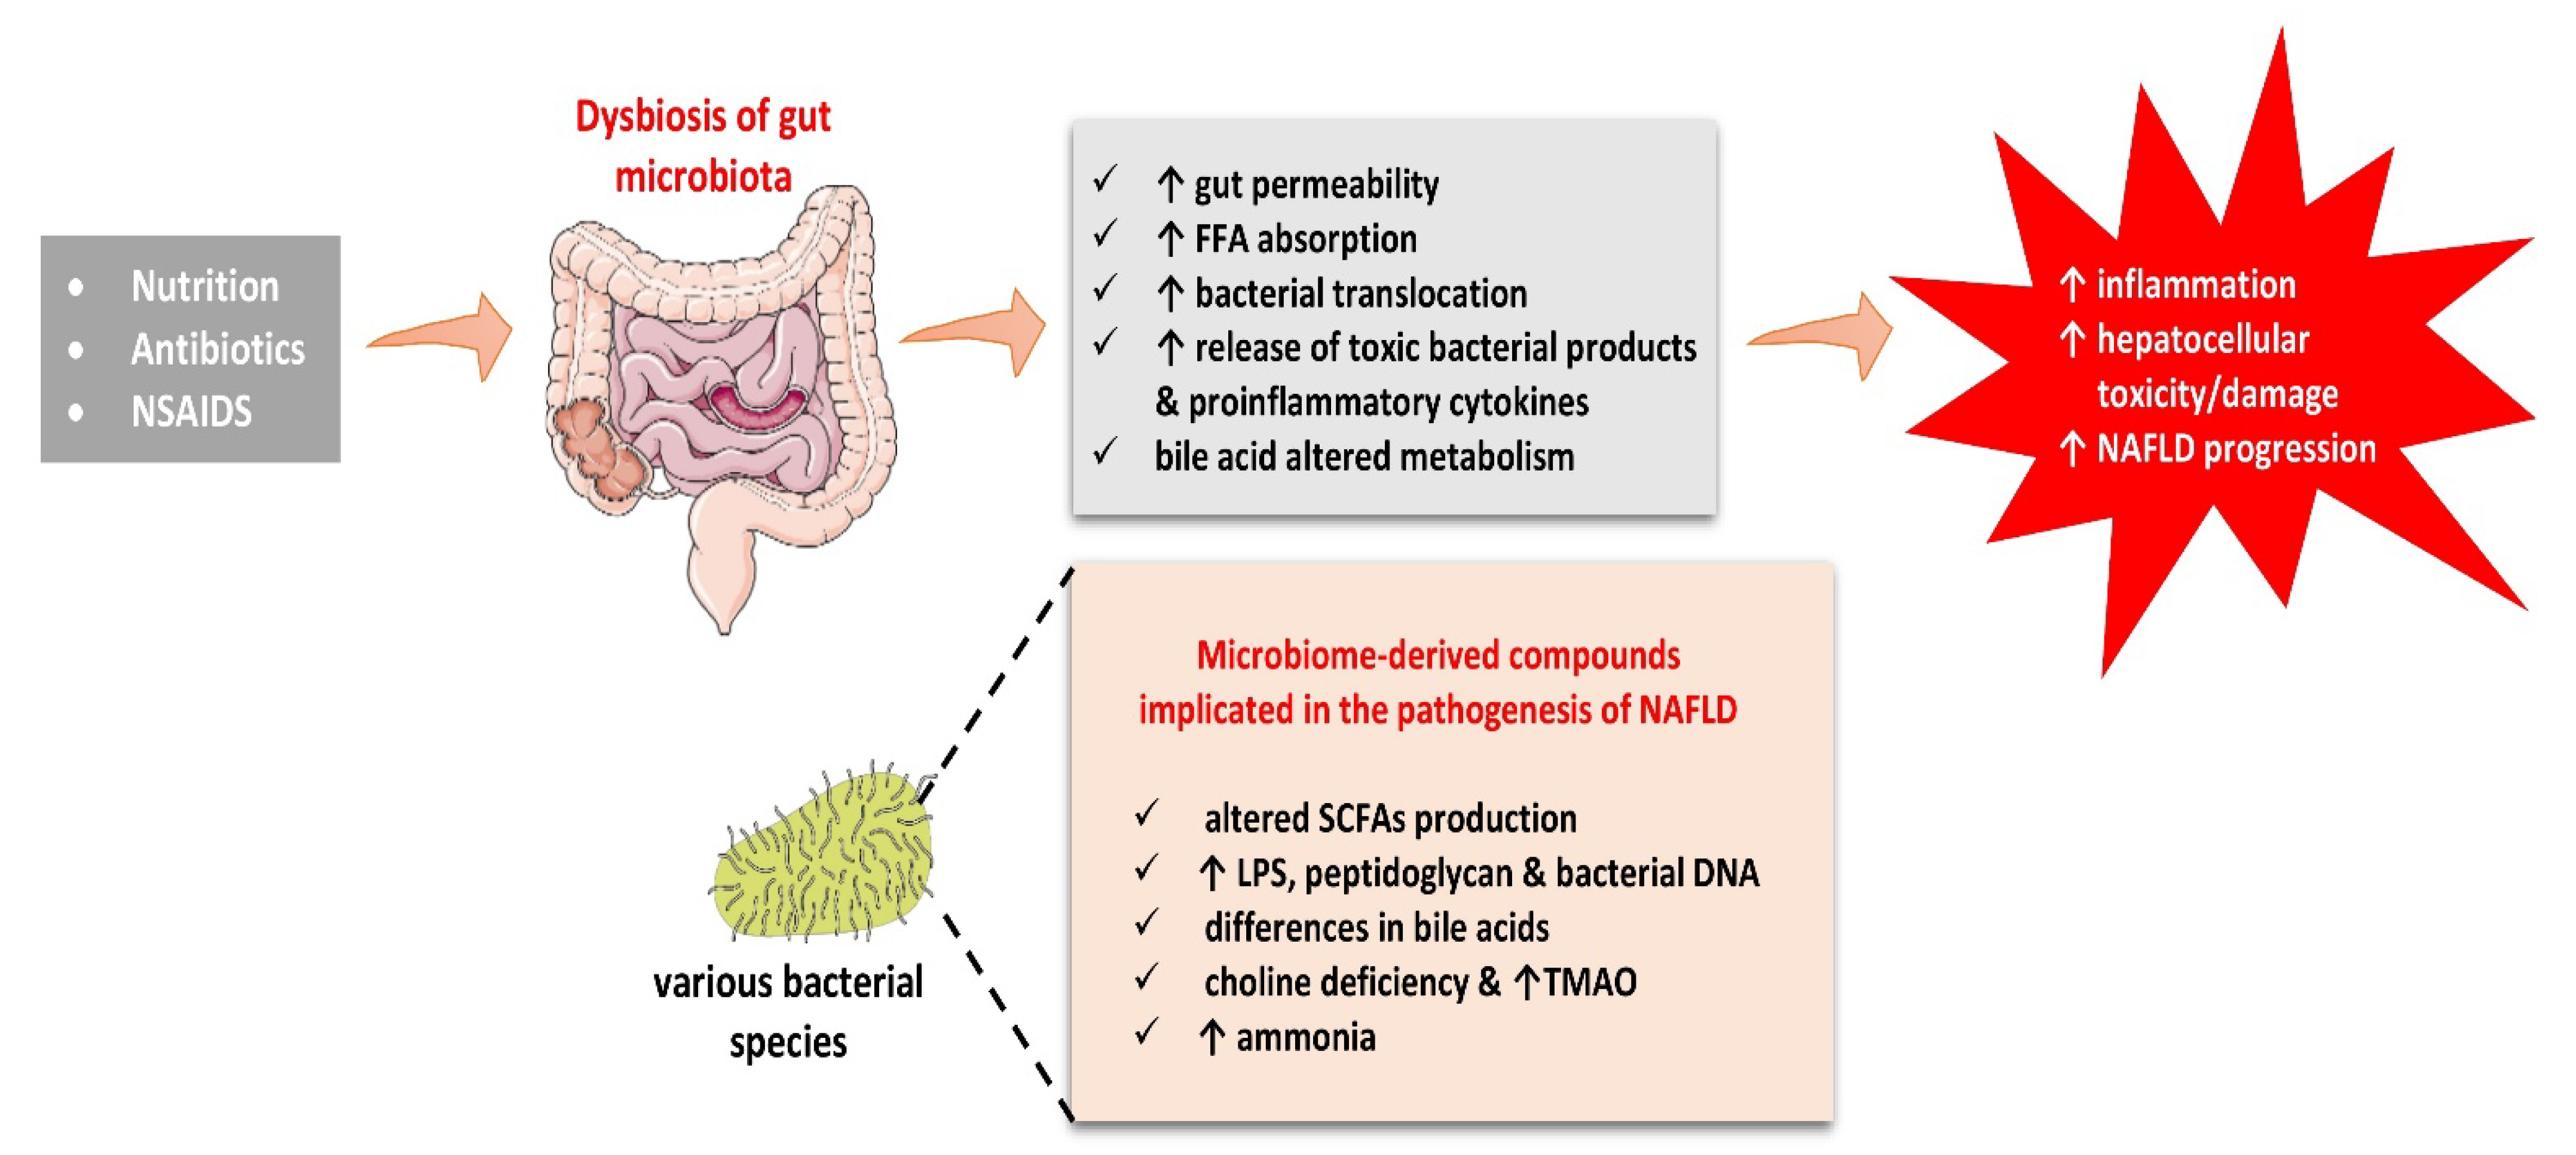 Biomolecules | Free Full-Text | Understanding the Role of the Gut Microbiome and Microbial Metabolites in Non-Alcoholic Fatty Disease: Current Evidence and